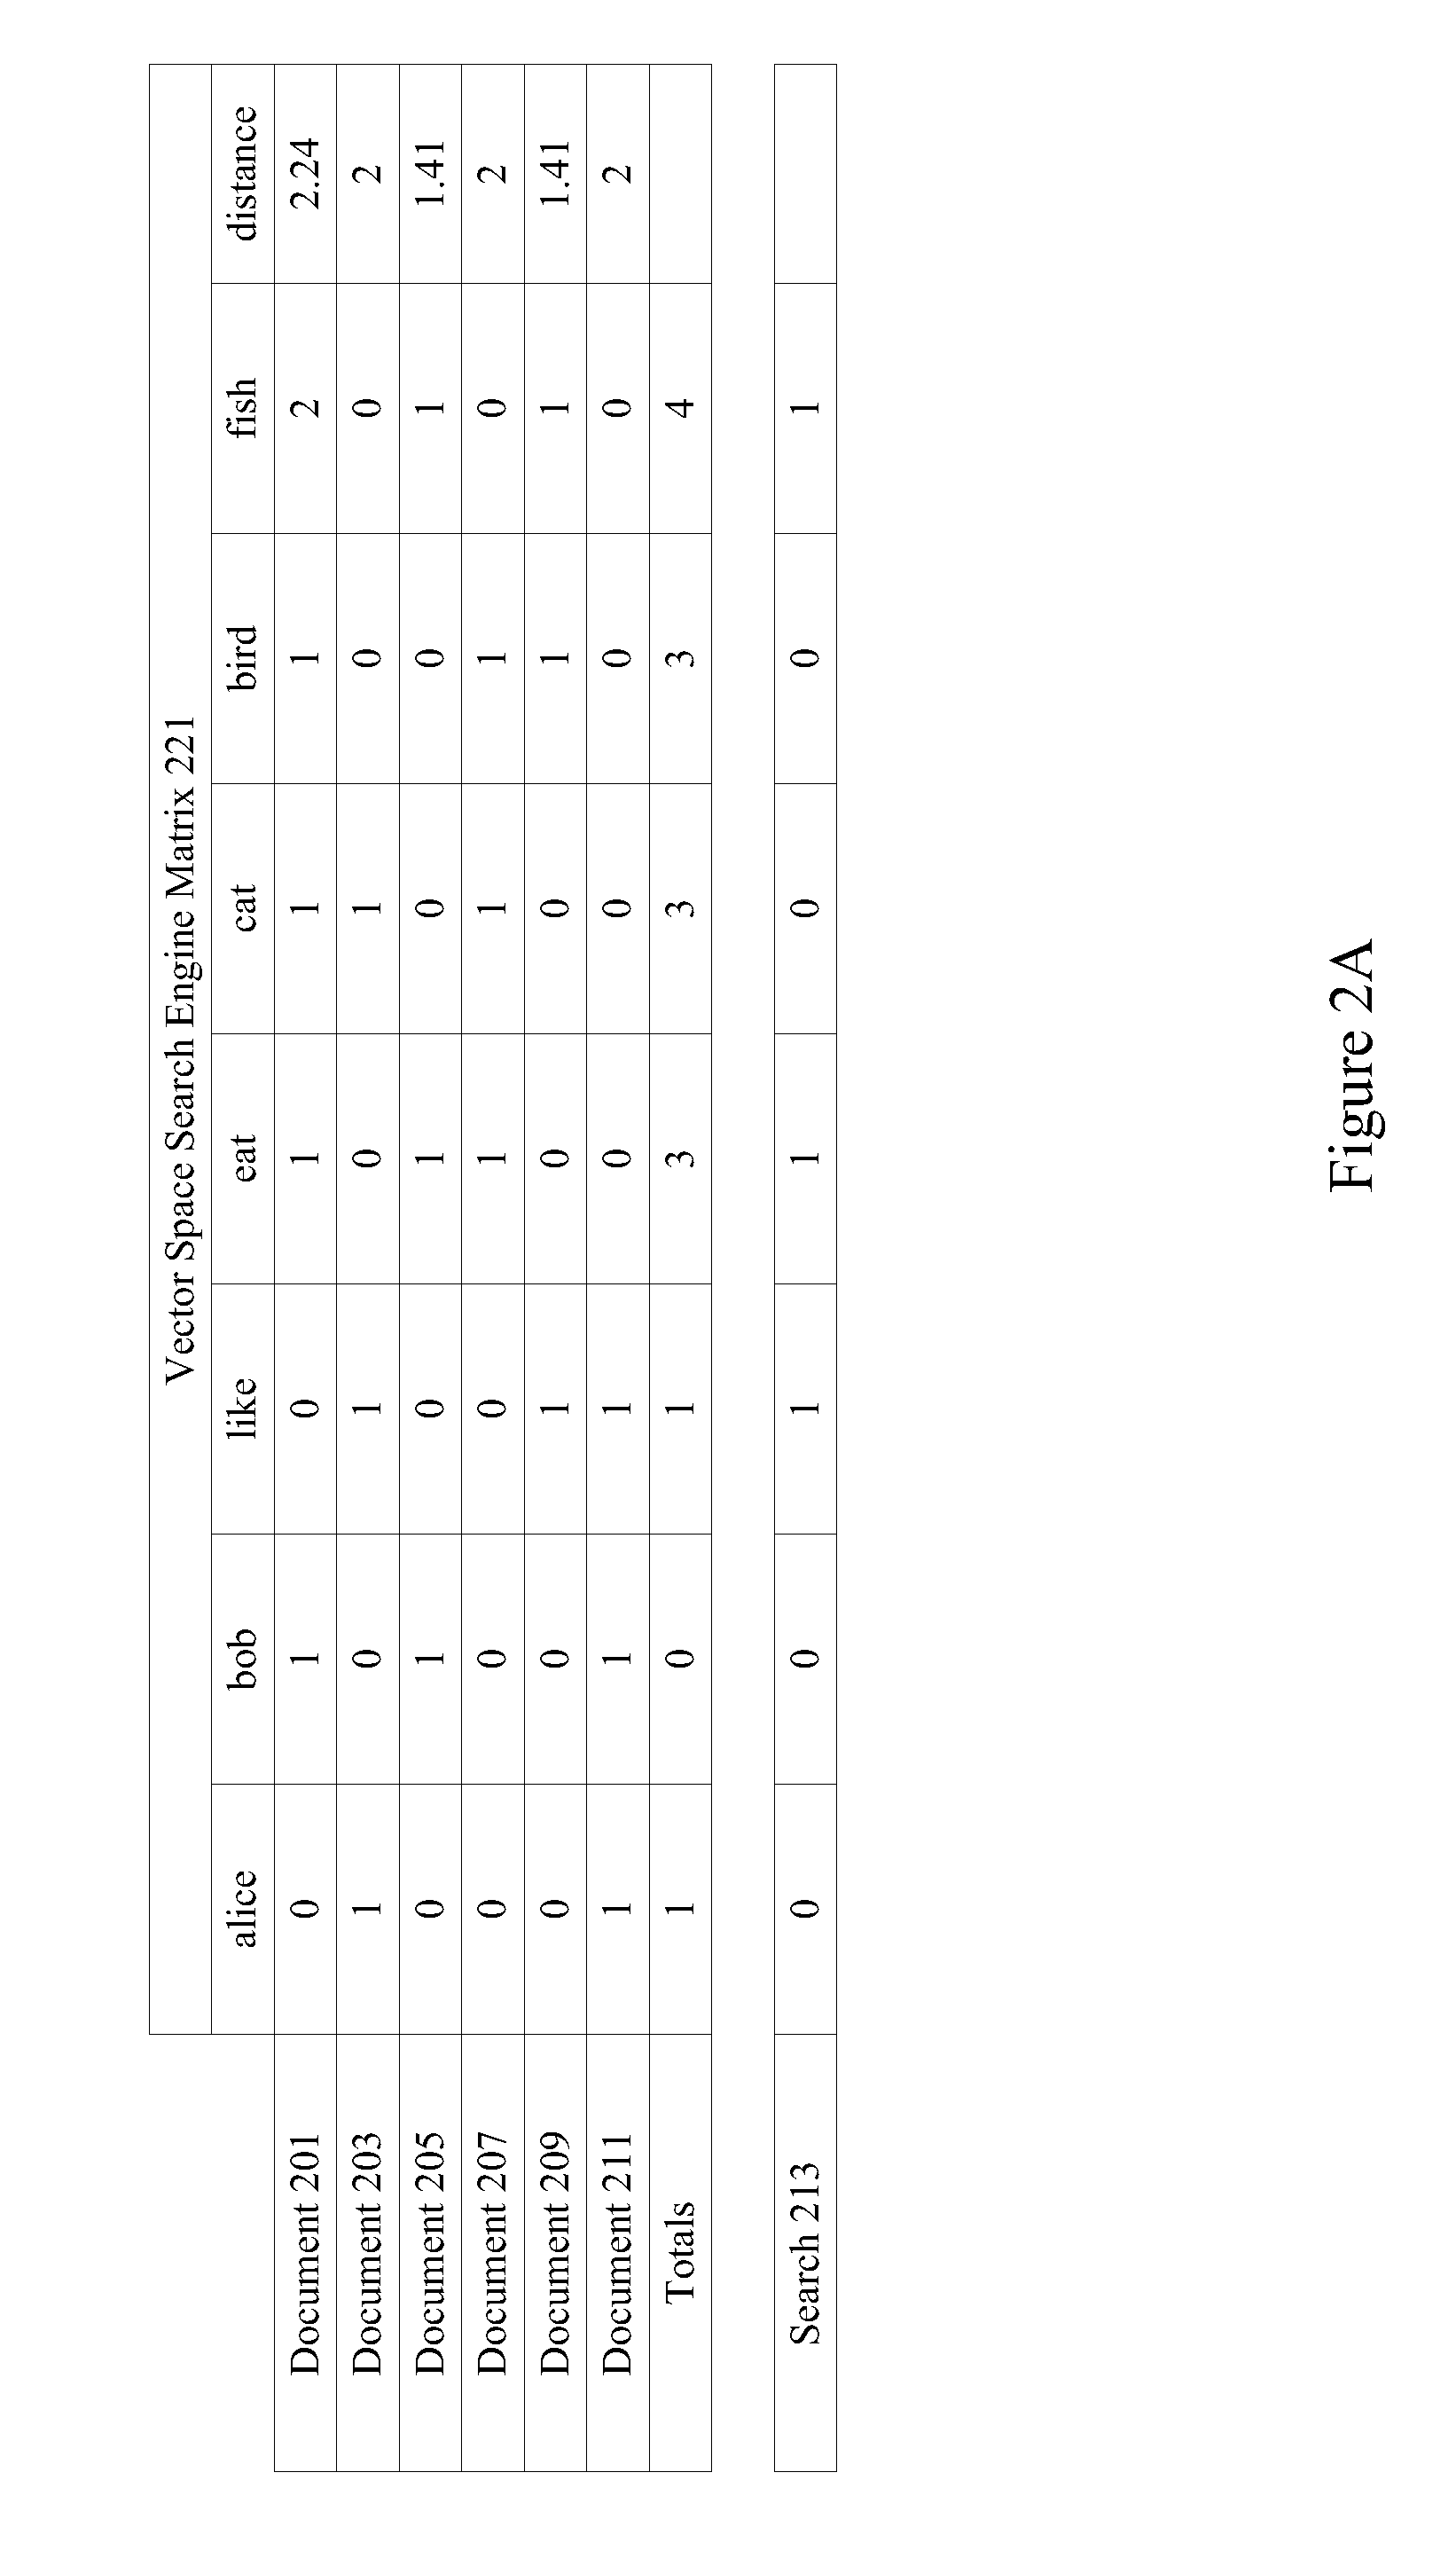 Retrieval and display of related content using text stream data feeds